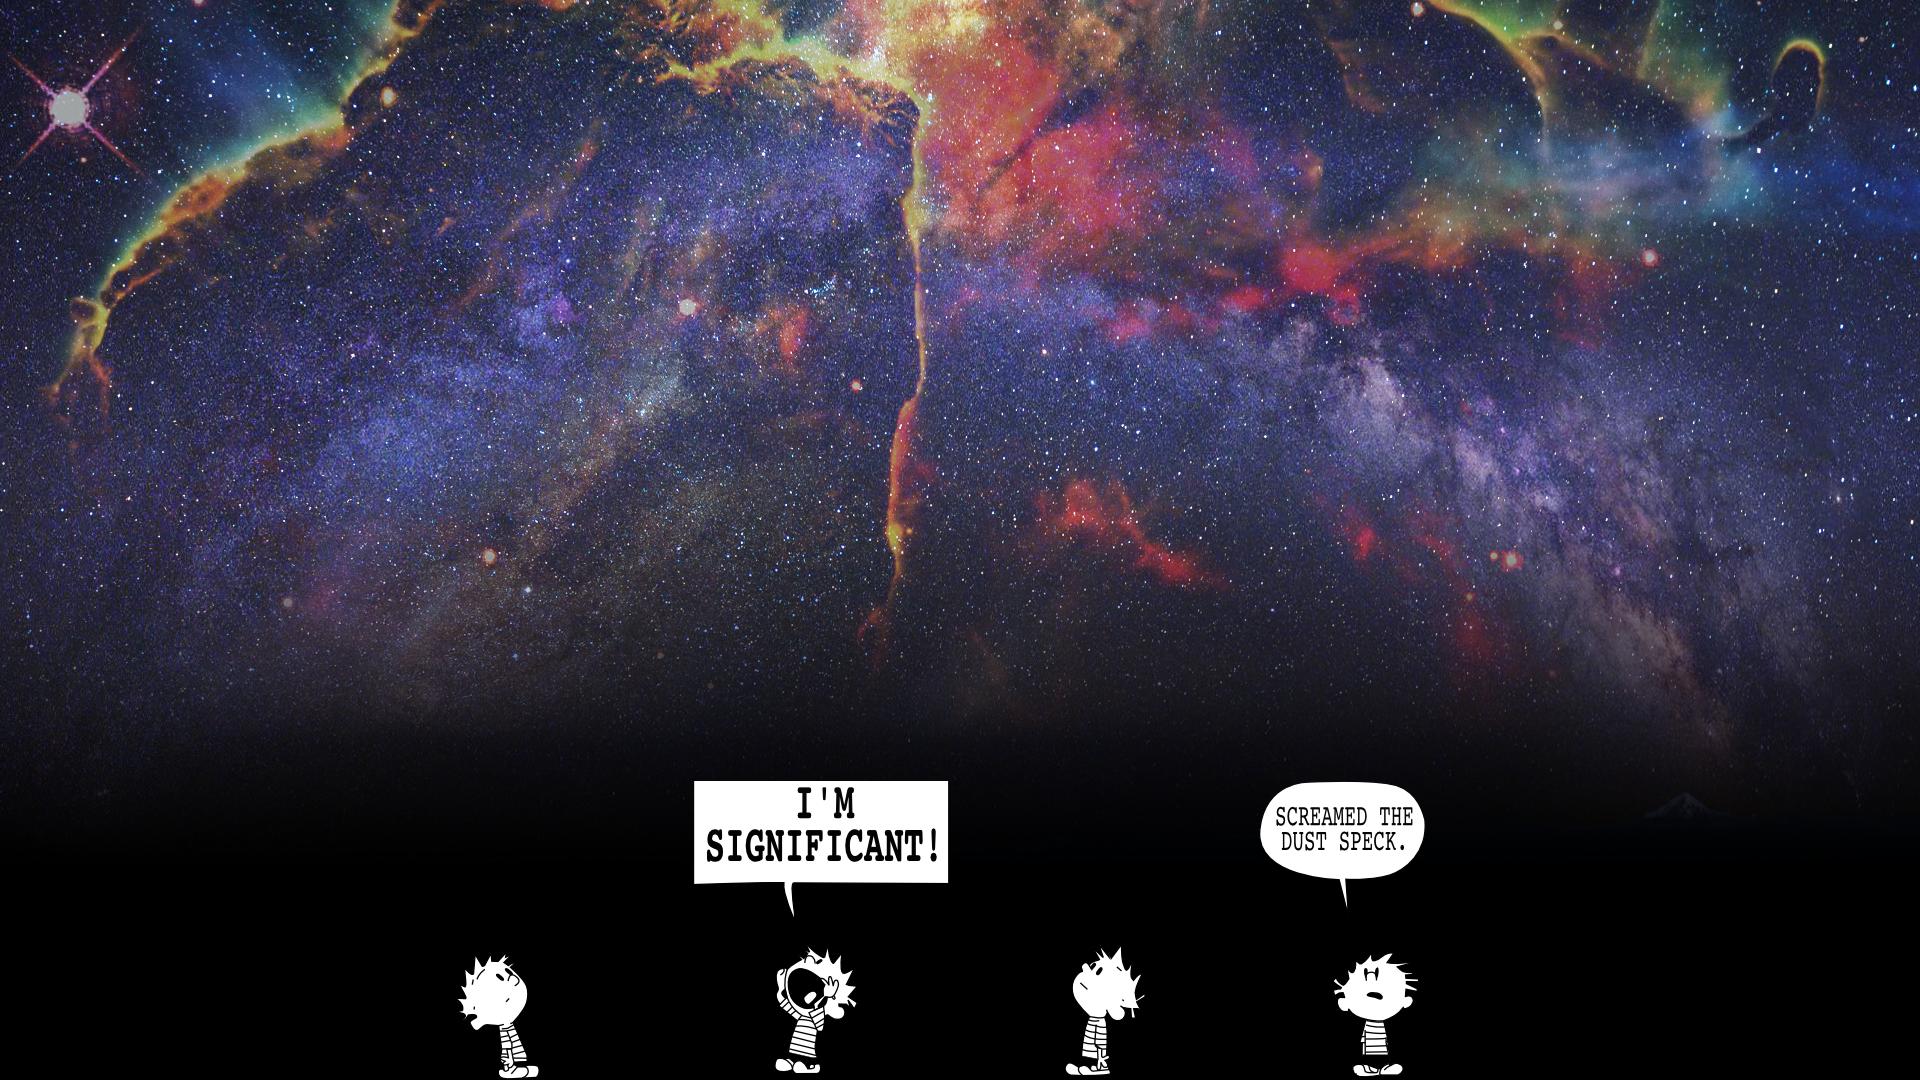 Calvin And Hobbes Space Wallpaper - Im Significant Screamed The Dust Speck , HD Wallpaper & Backgrounds